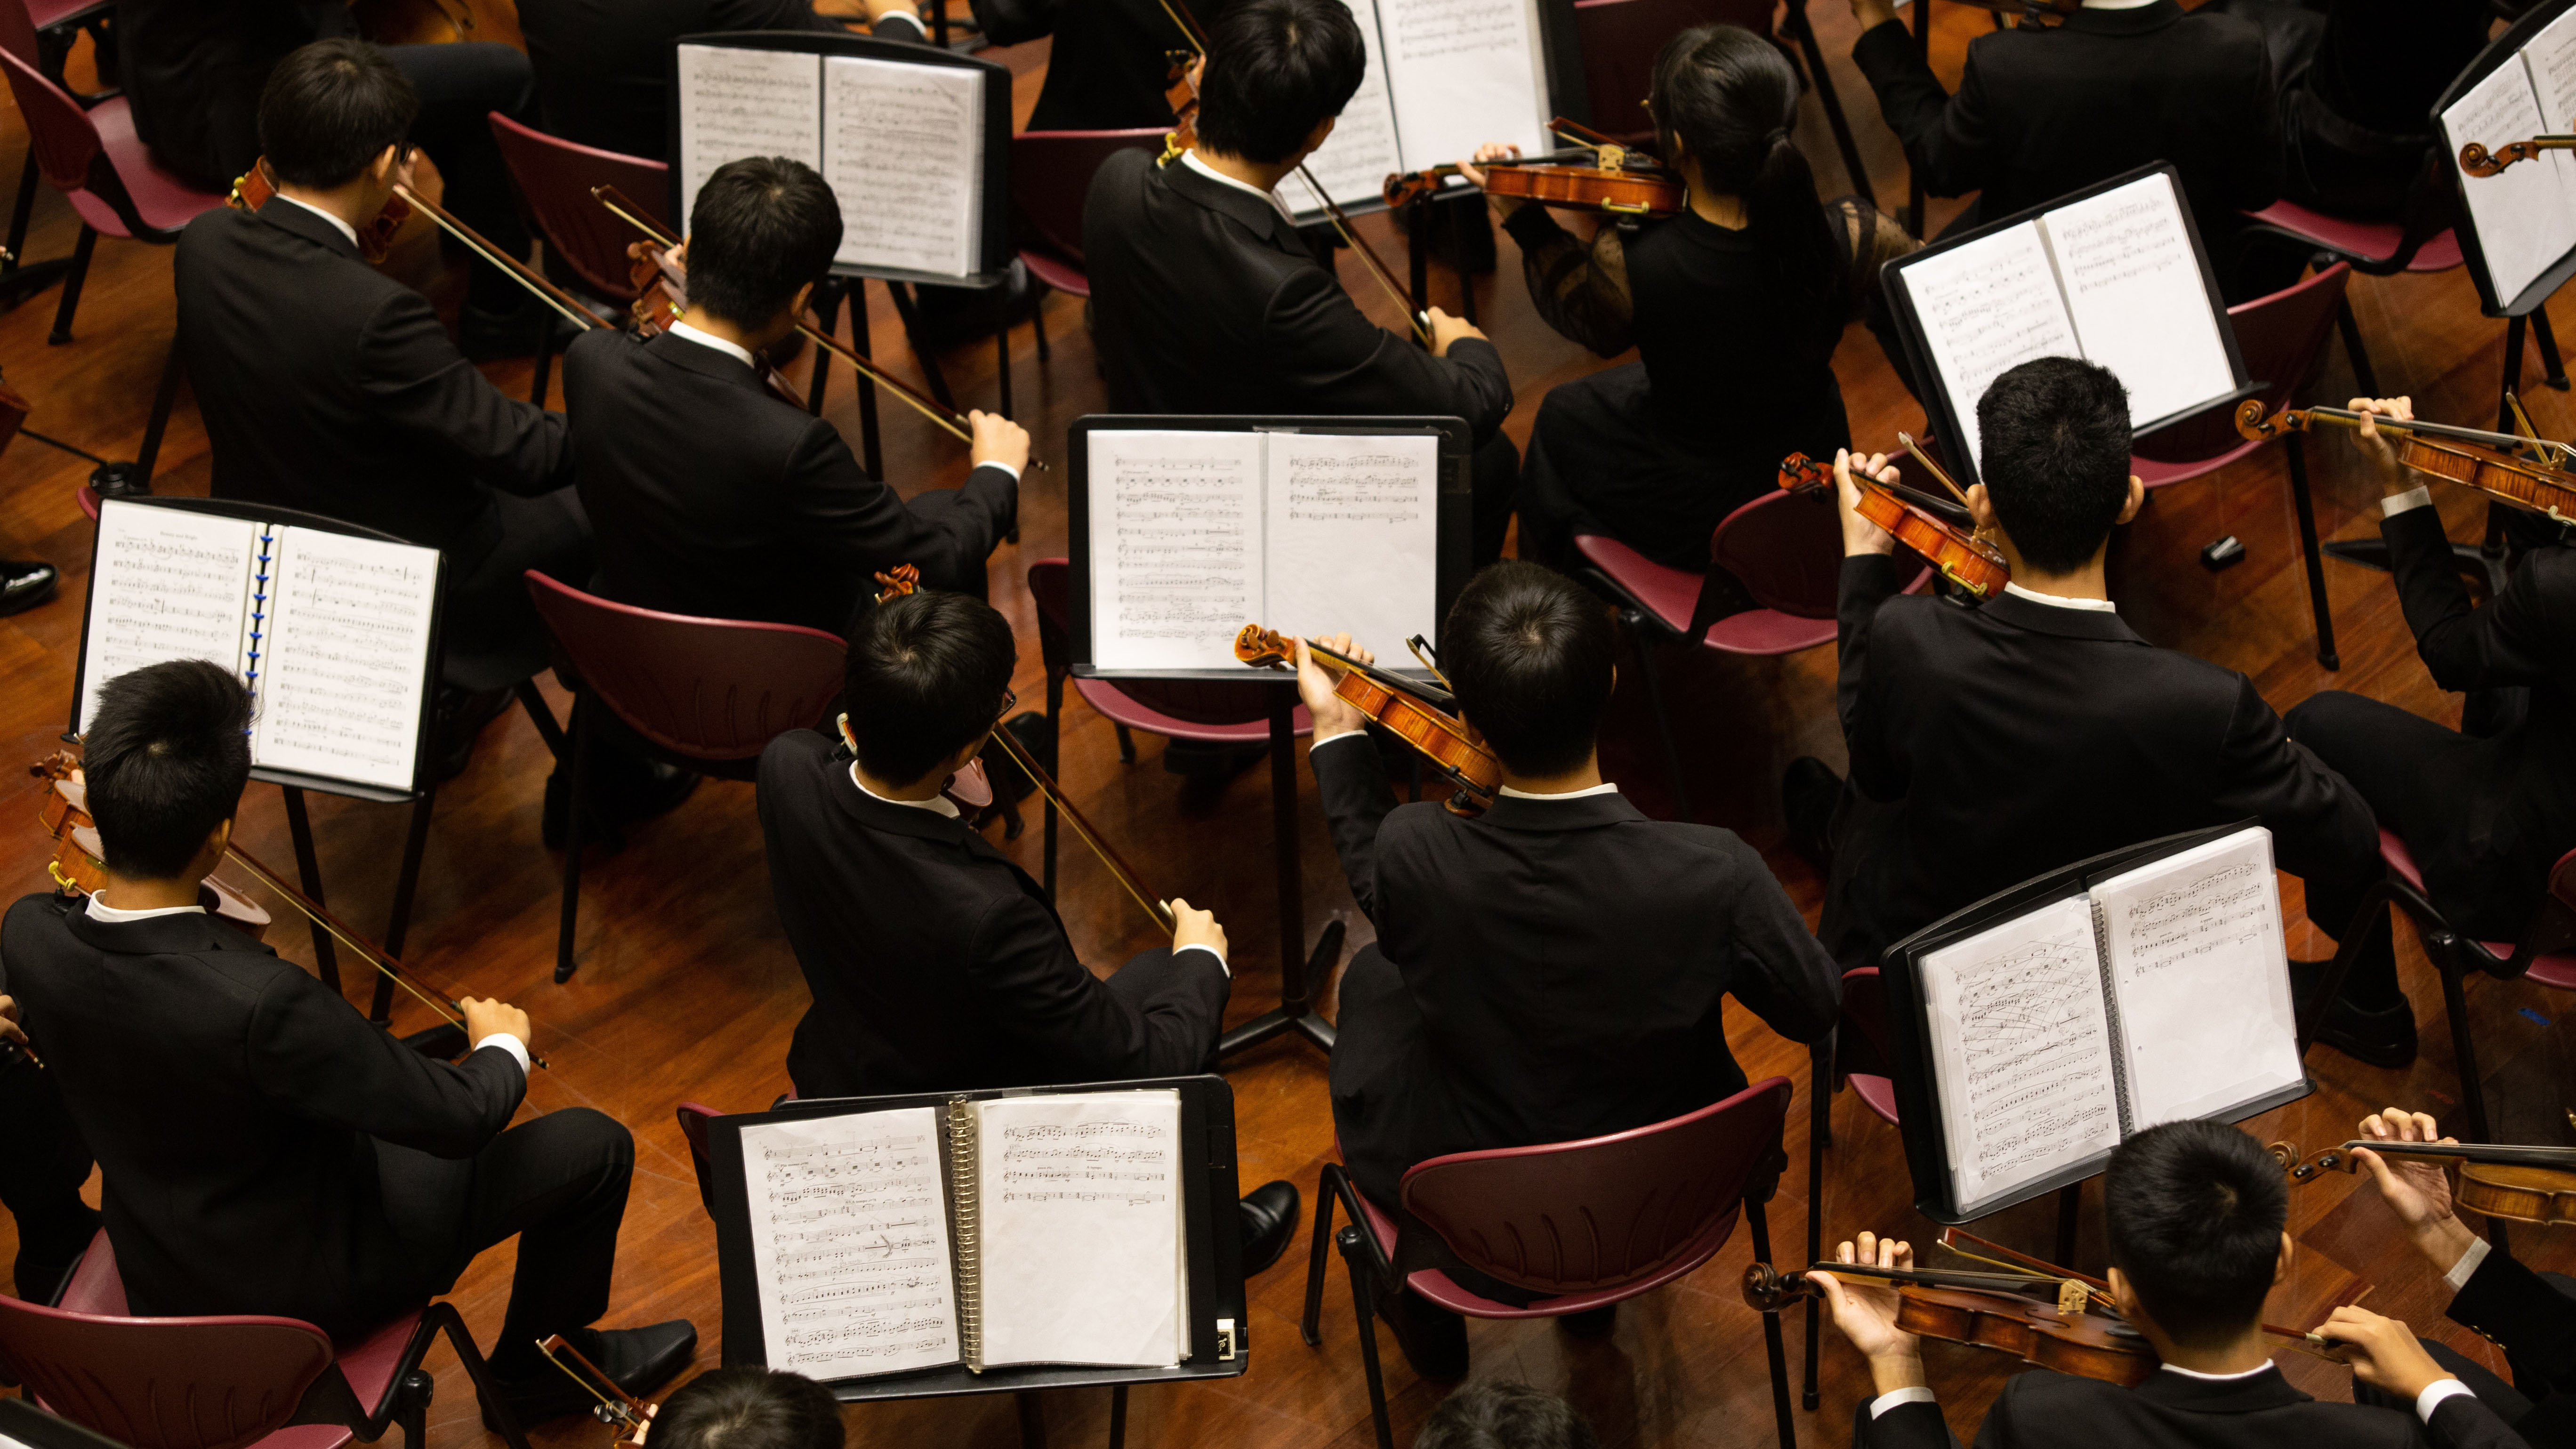 The Orchestra Events